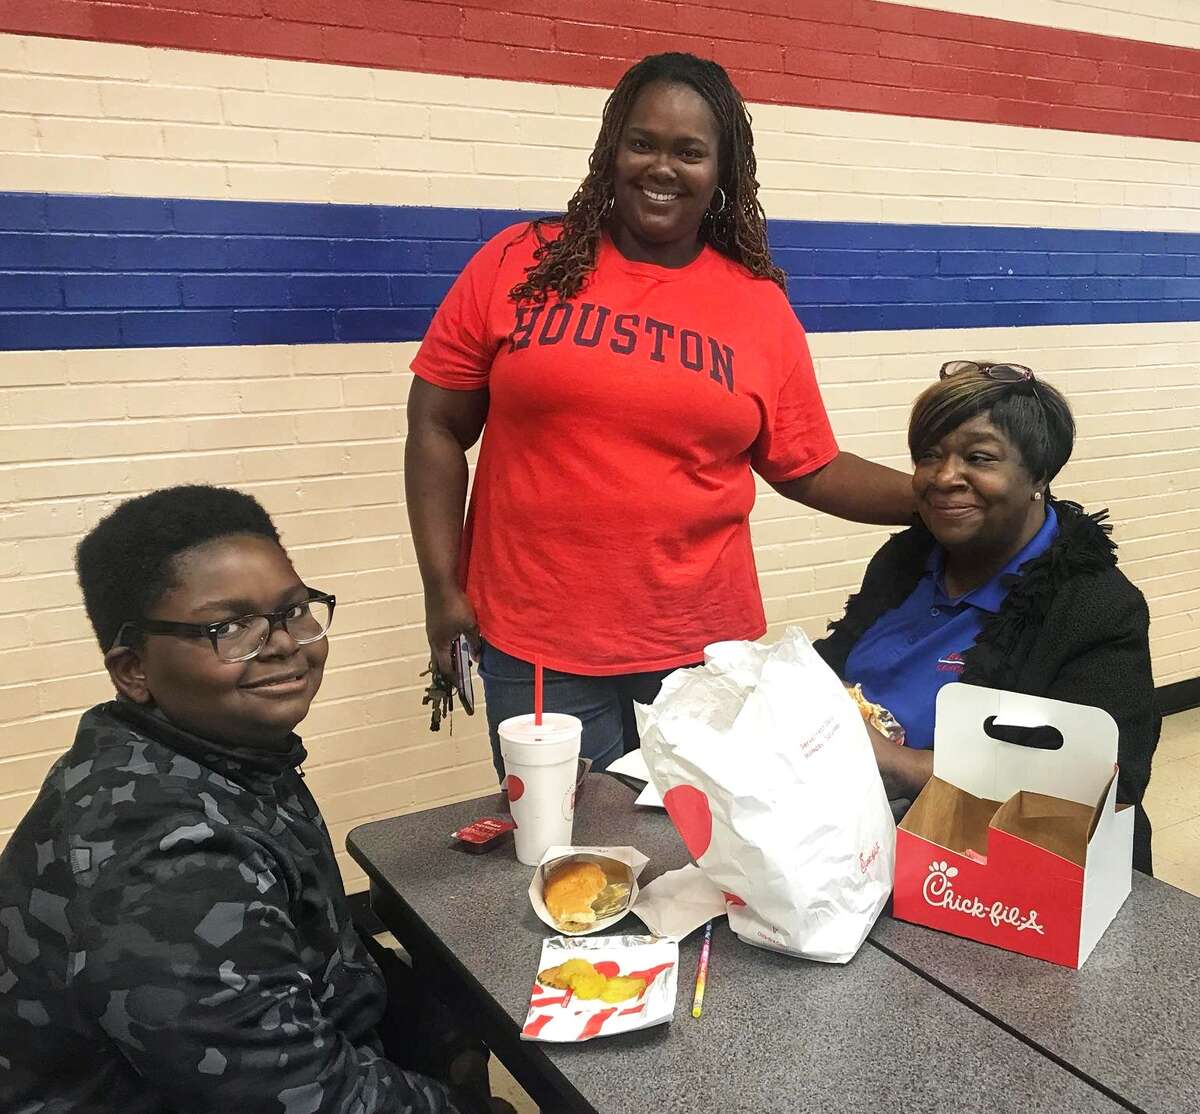 Franks Elementary School hosted a special lunch event last week in honor of campus moms. Staff and students showed their appreciation and enjoyed lunch with more than 150 mothers. Campus administration plans to host these special lunch events every month.